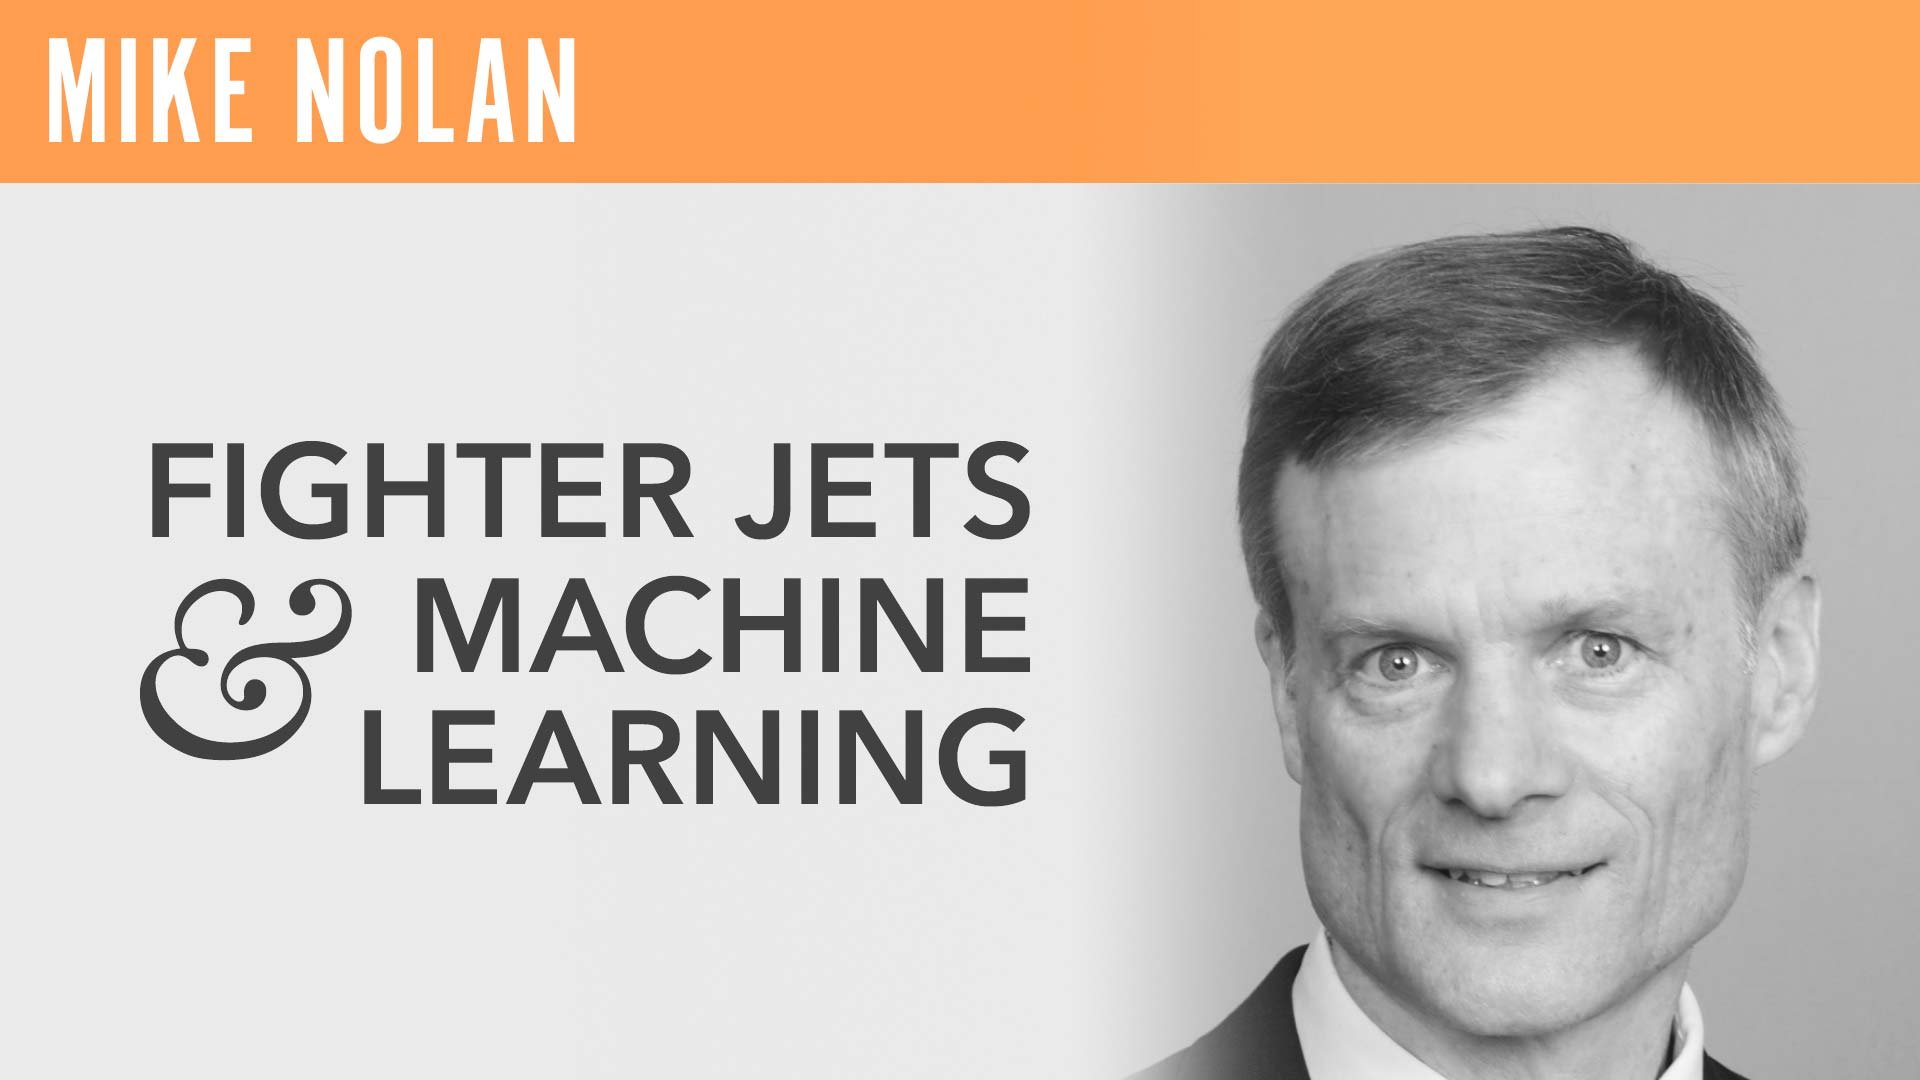 Mike Nolan, "Fighter Jets and Machine Learning"